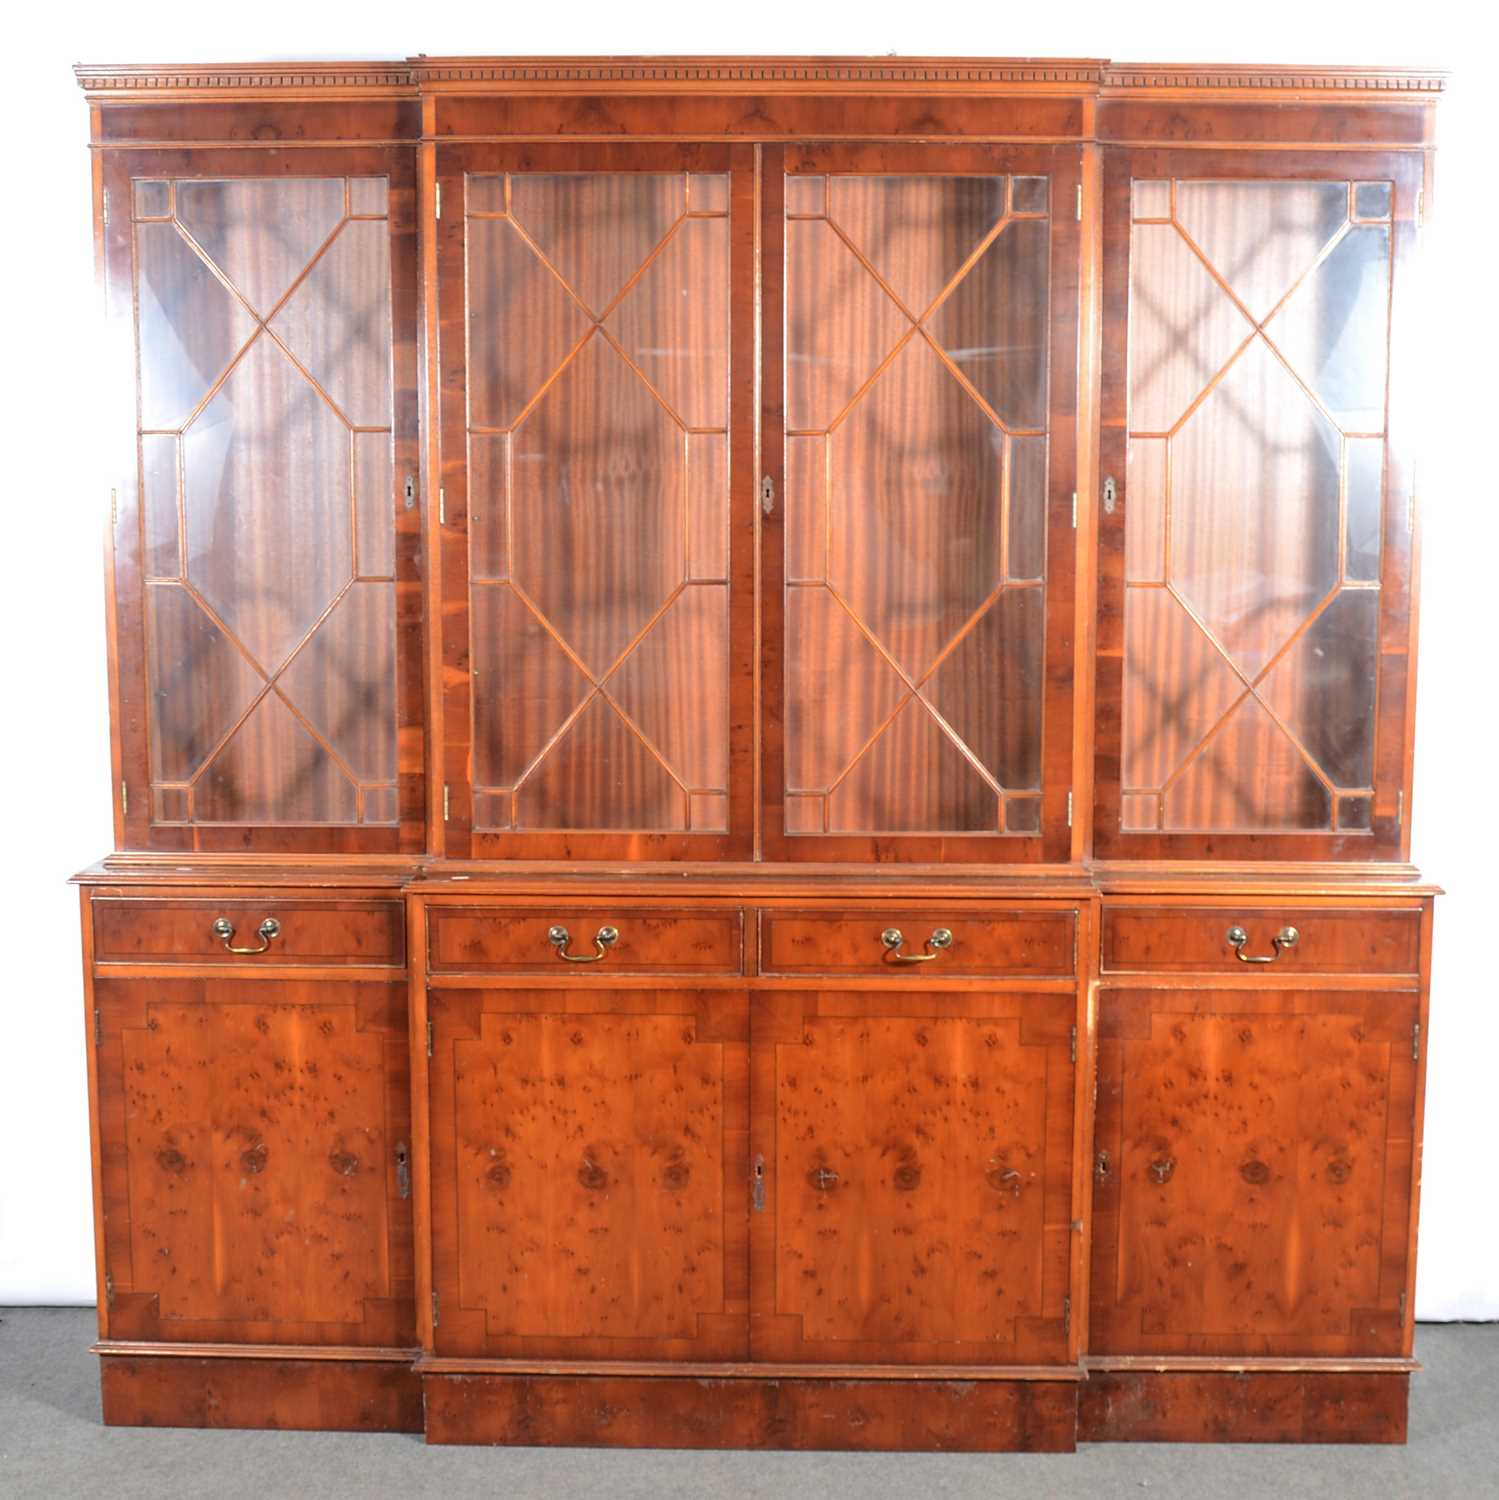 Reproduction yew wood breakfront bookcase